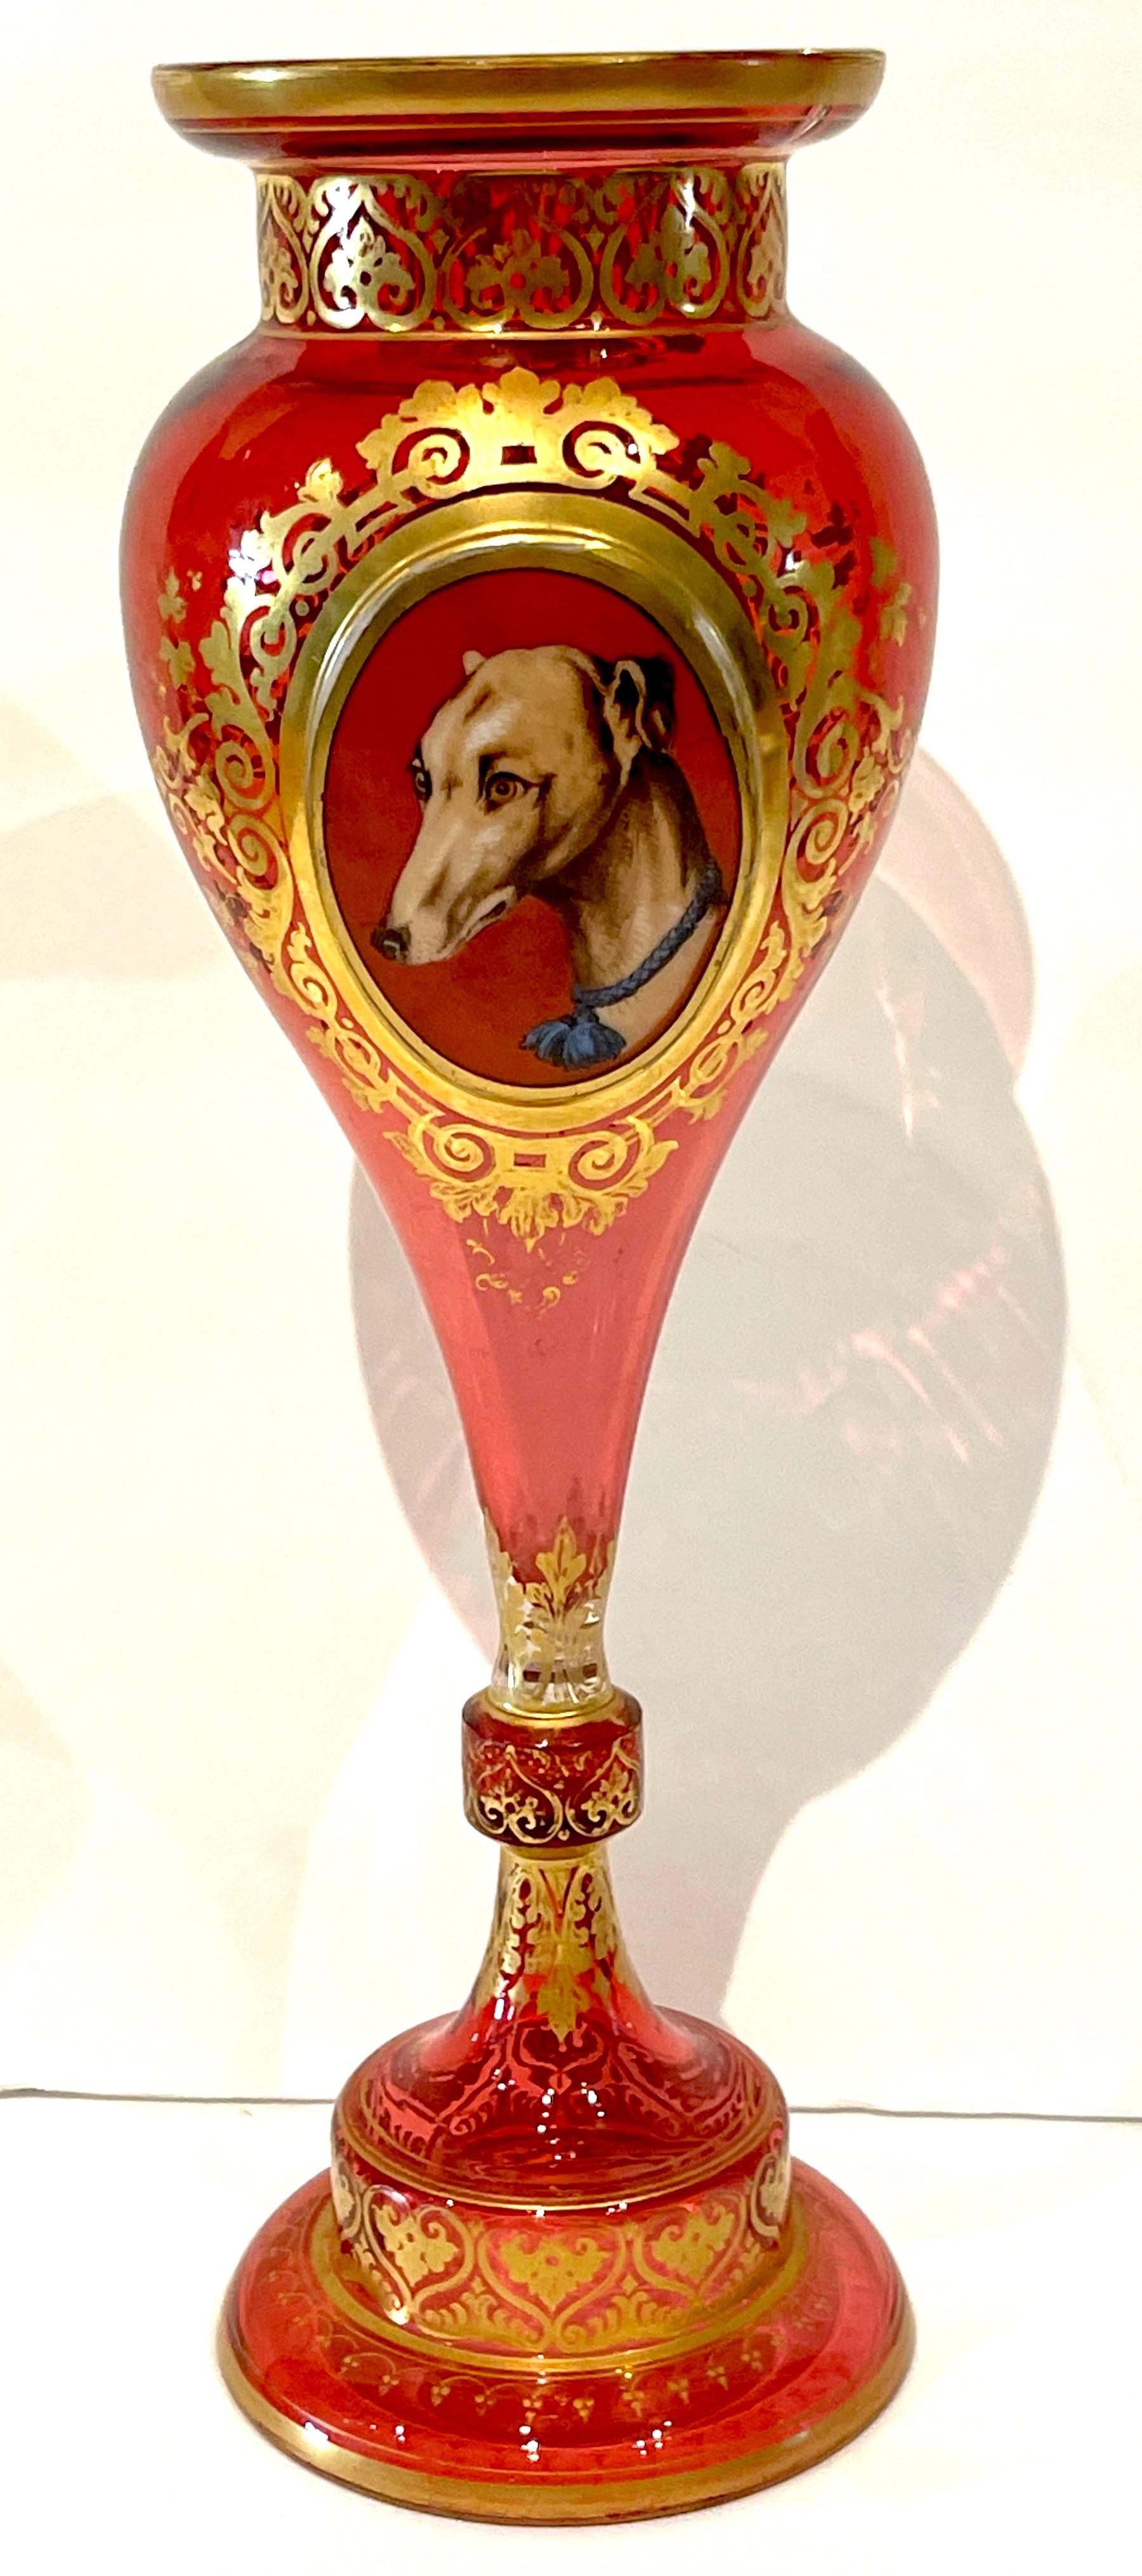 Moser Cranberry, Gilt & Enameled 'Whippet & Goat' portrait vase. 
Czech-Republic, Circa 1880s.
A fine example, a stylized undulating trumpet vase, executed in beautiful cranberry glass, with exquisite gilt enameling. The front of the vase is